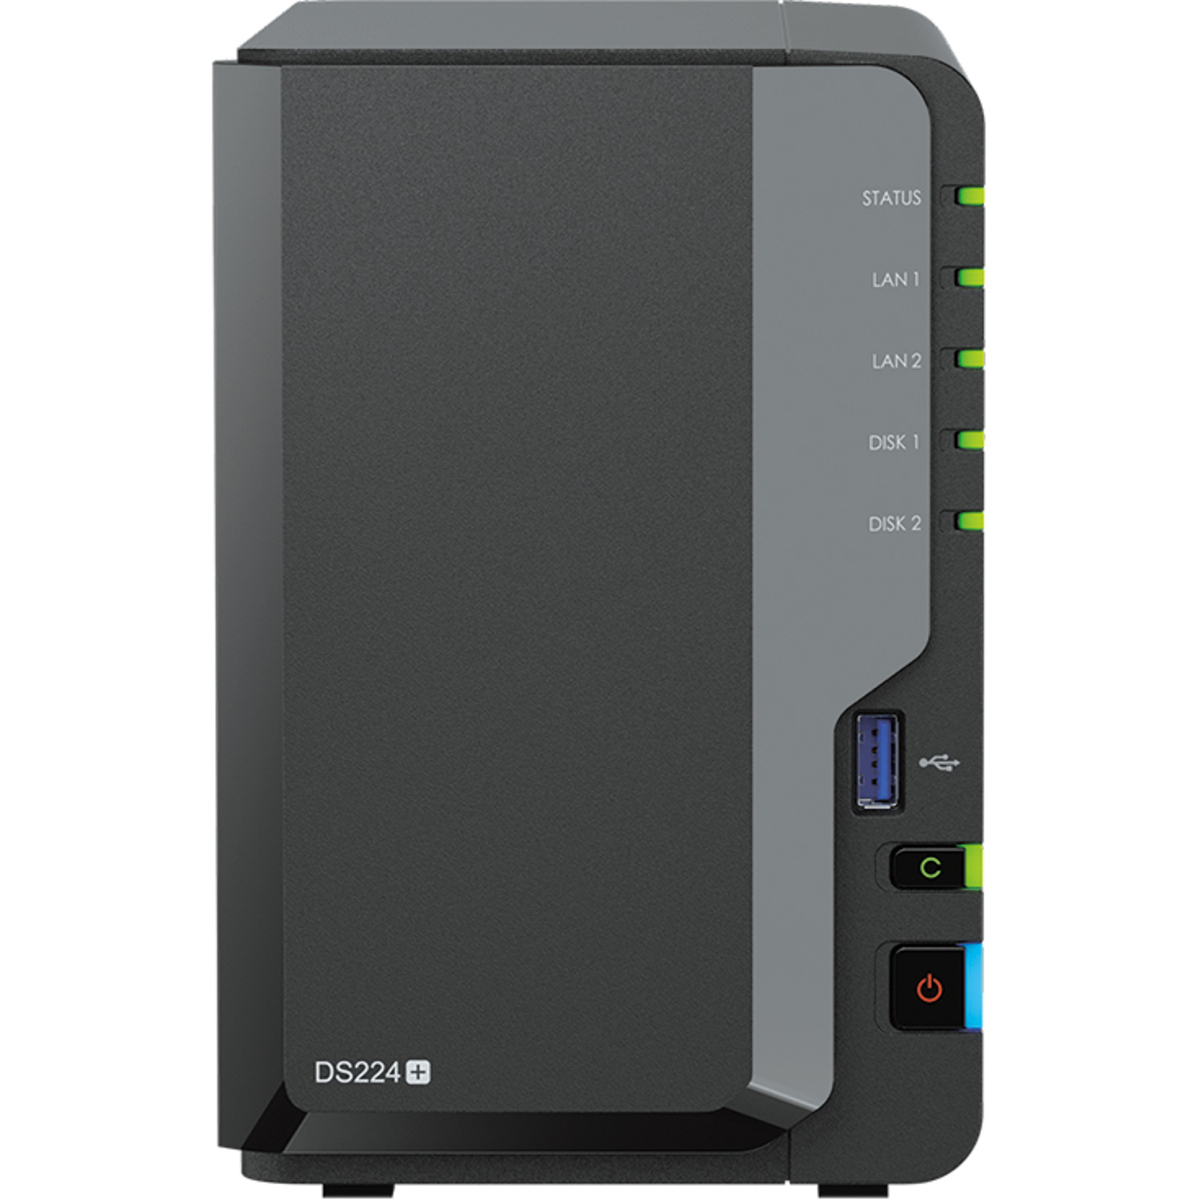 Synology DiskStation DS224+ 12tb 2-Bay Desktop Personal / Basic Home / Small Office NAS - Network Attached Storage Device 2x6tb Western Digital Red Plus WD60EFPX 3.5 5640rpm SATA 6Gb/s HDD NAS Class Drives Installed - Burn-In Tested - ON SALE - FREE RAM UPGRADE DiskStation DS224+